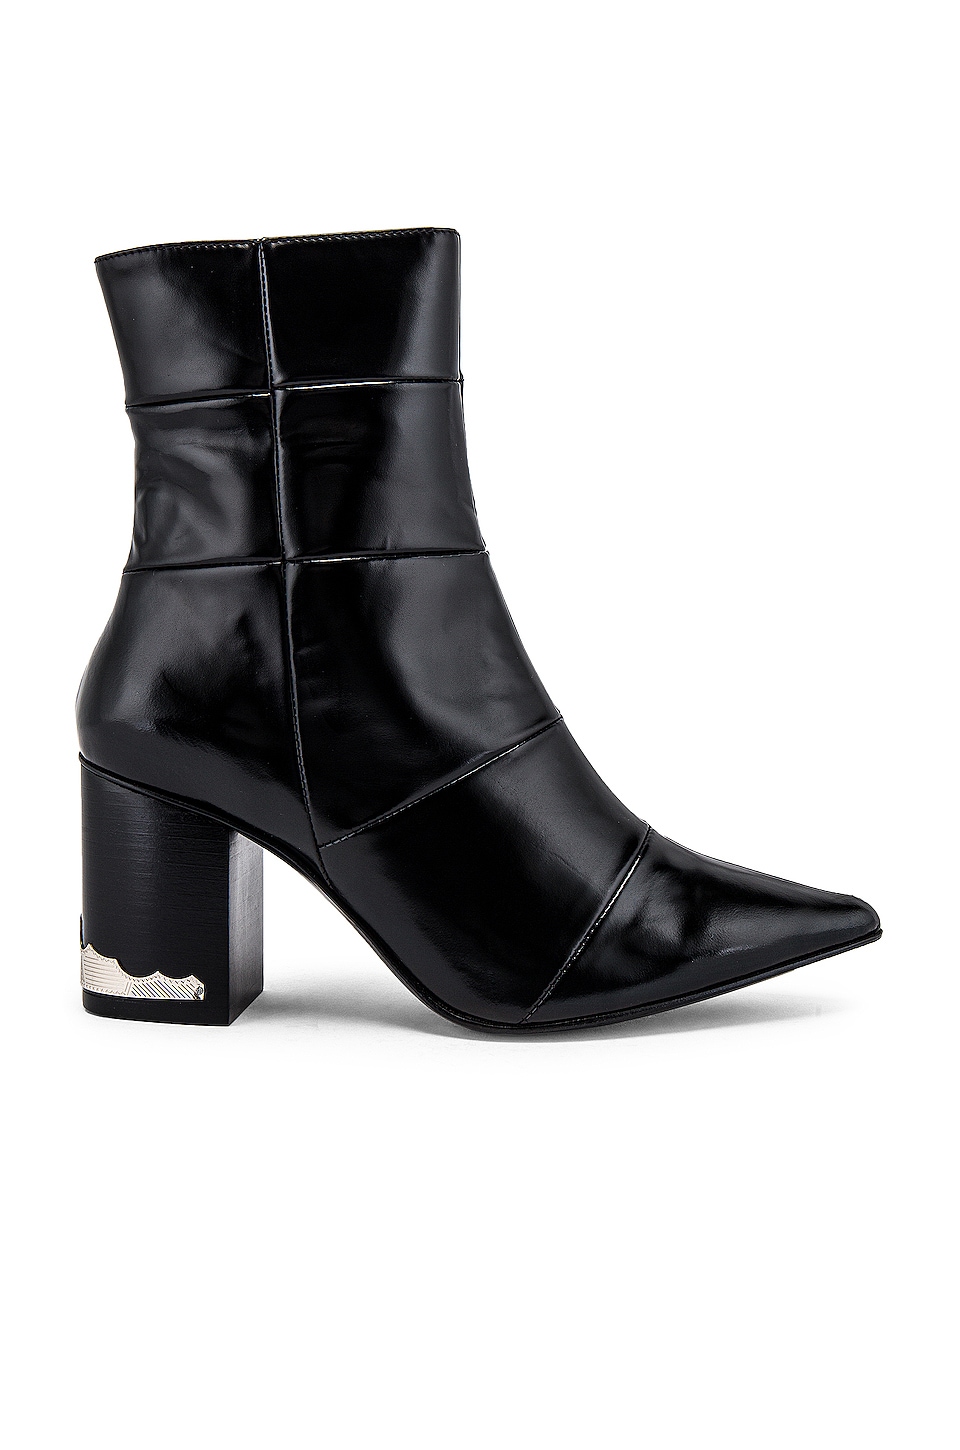 TOGA PULLA Pointed Toe Bootie in Black 